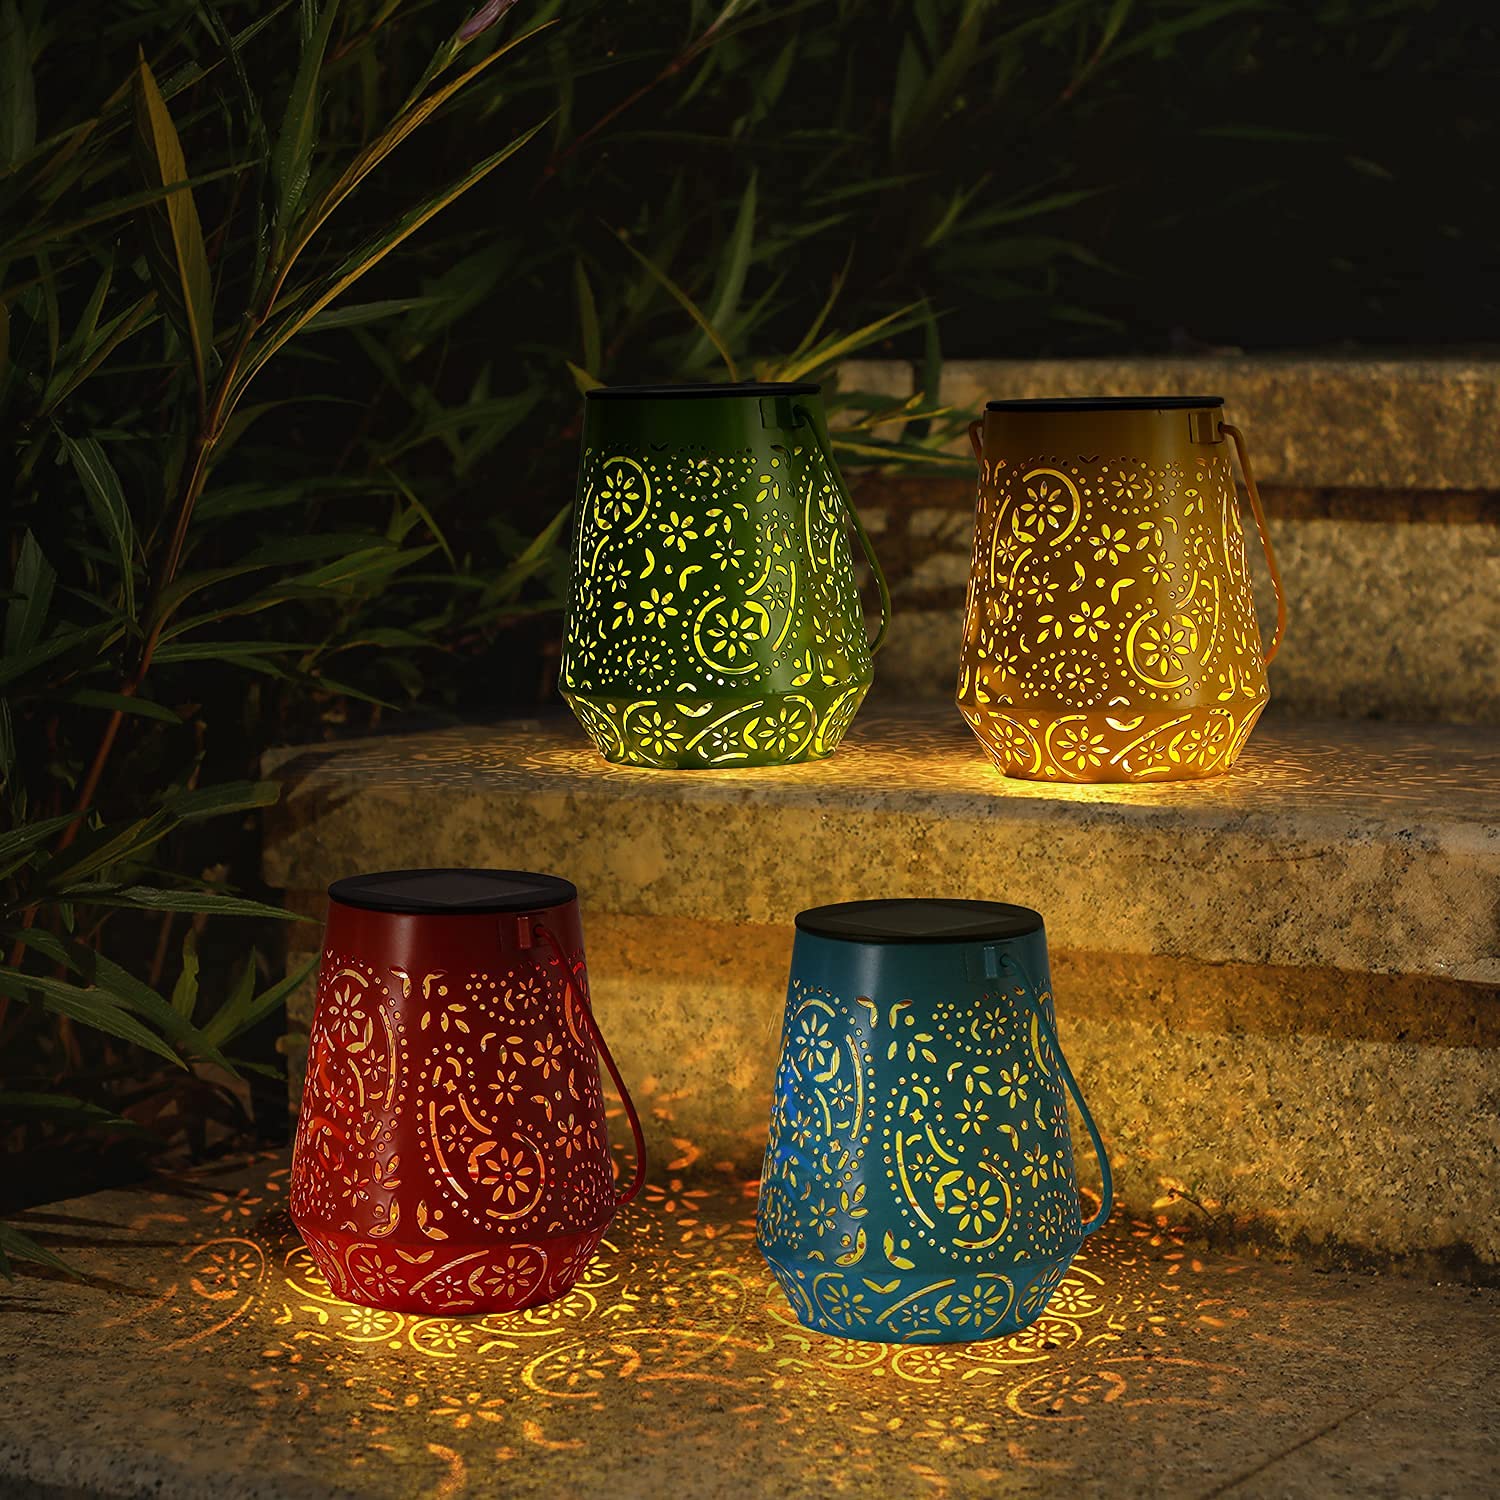 Garden Lights Outdoor Solar Lantern - OxyLED 4 Pack Colorful Hanging Metal Lamp IP44 Waterproof Moroccan Decoration Ornaments for Patio Fence Tree Room Outside Multicolors